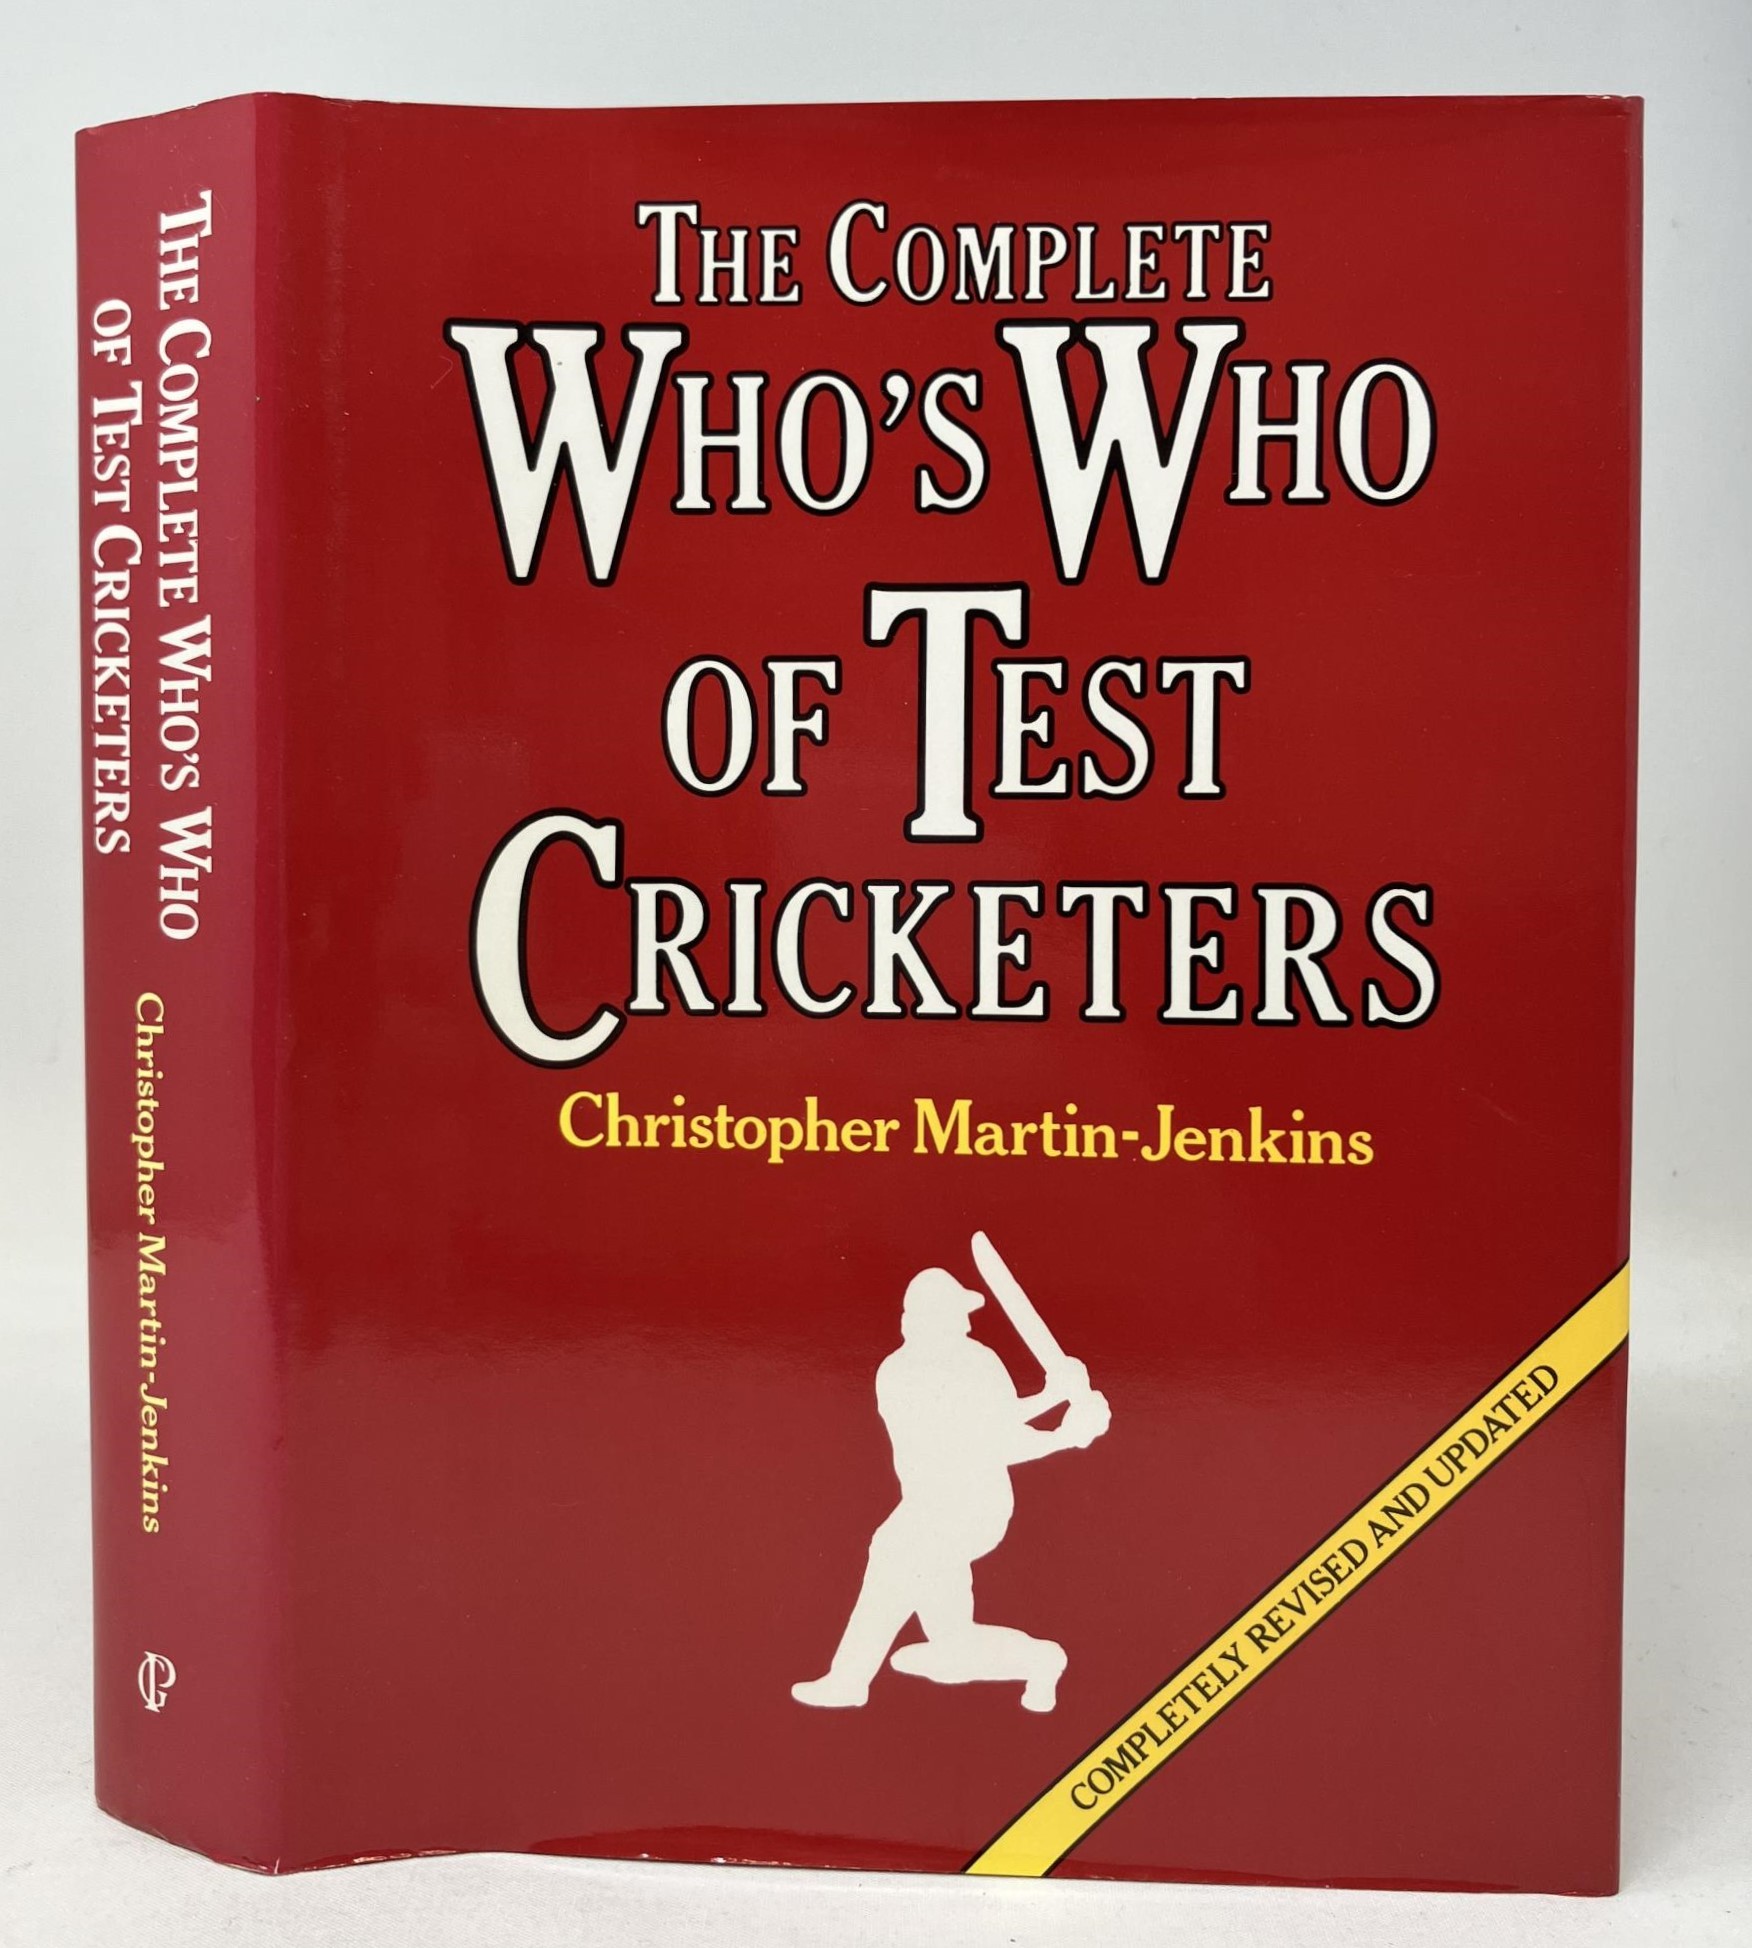 Martin-Jenkins (Christopher), The Complete Whose Who Of Test Cricketers, and assorted other books on